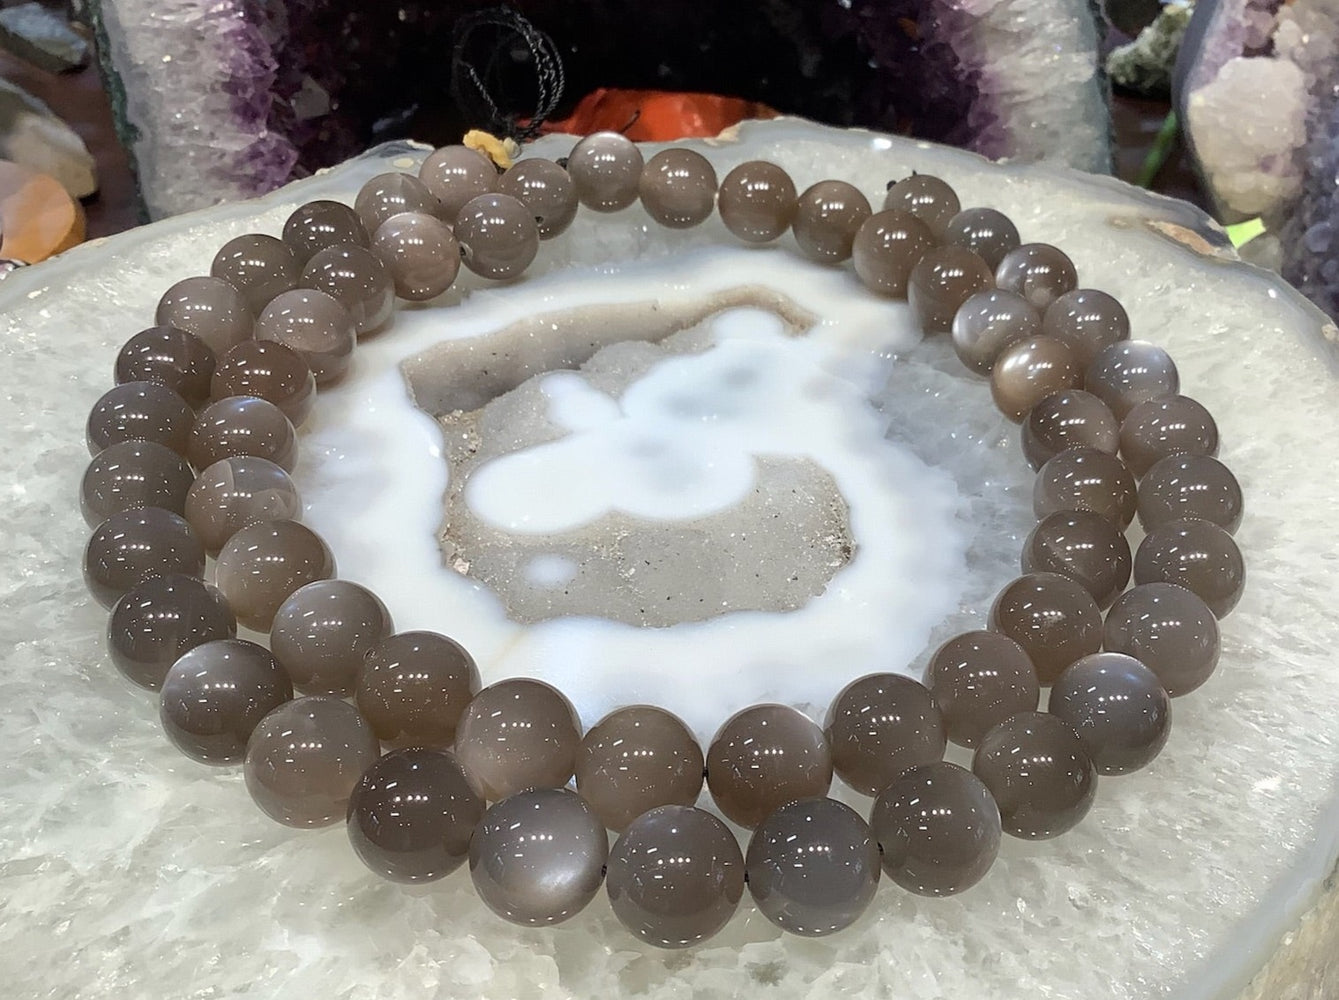 Stunning 15mm Natural Moonstone Beads - Exquisite Chatoyance